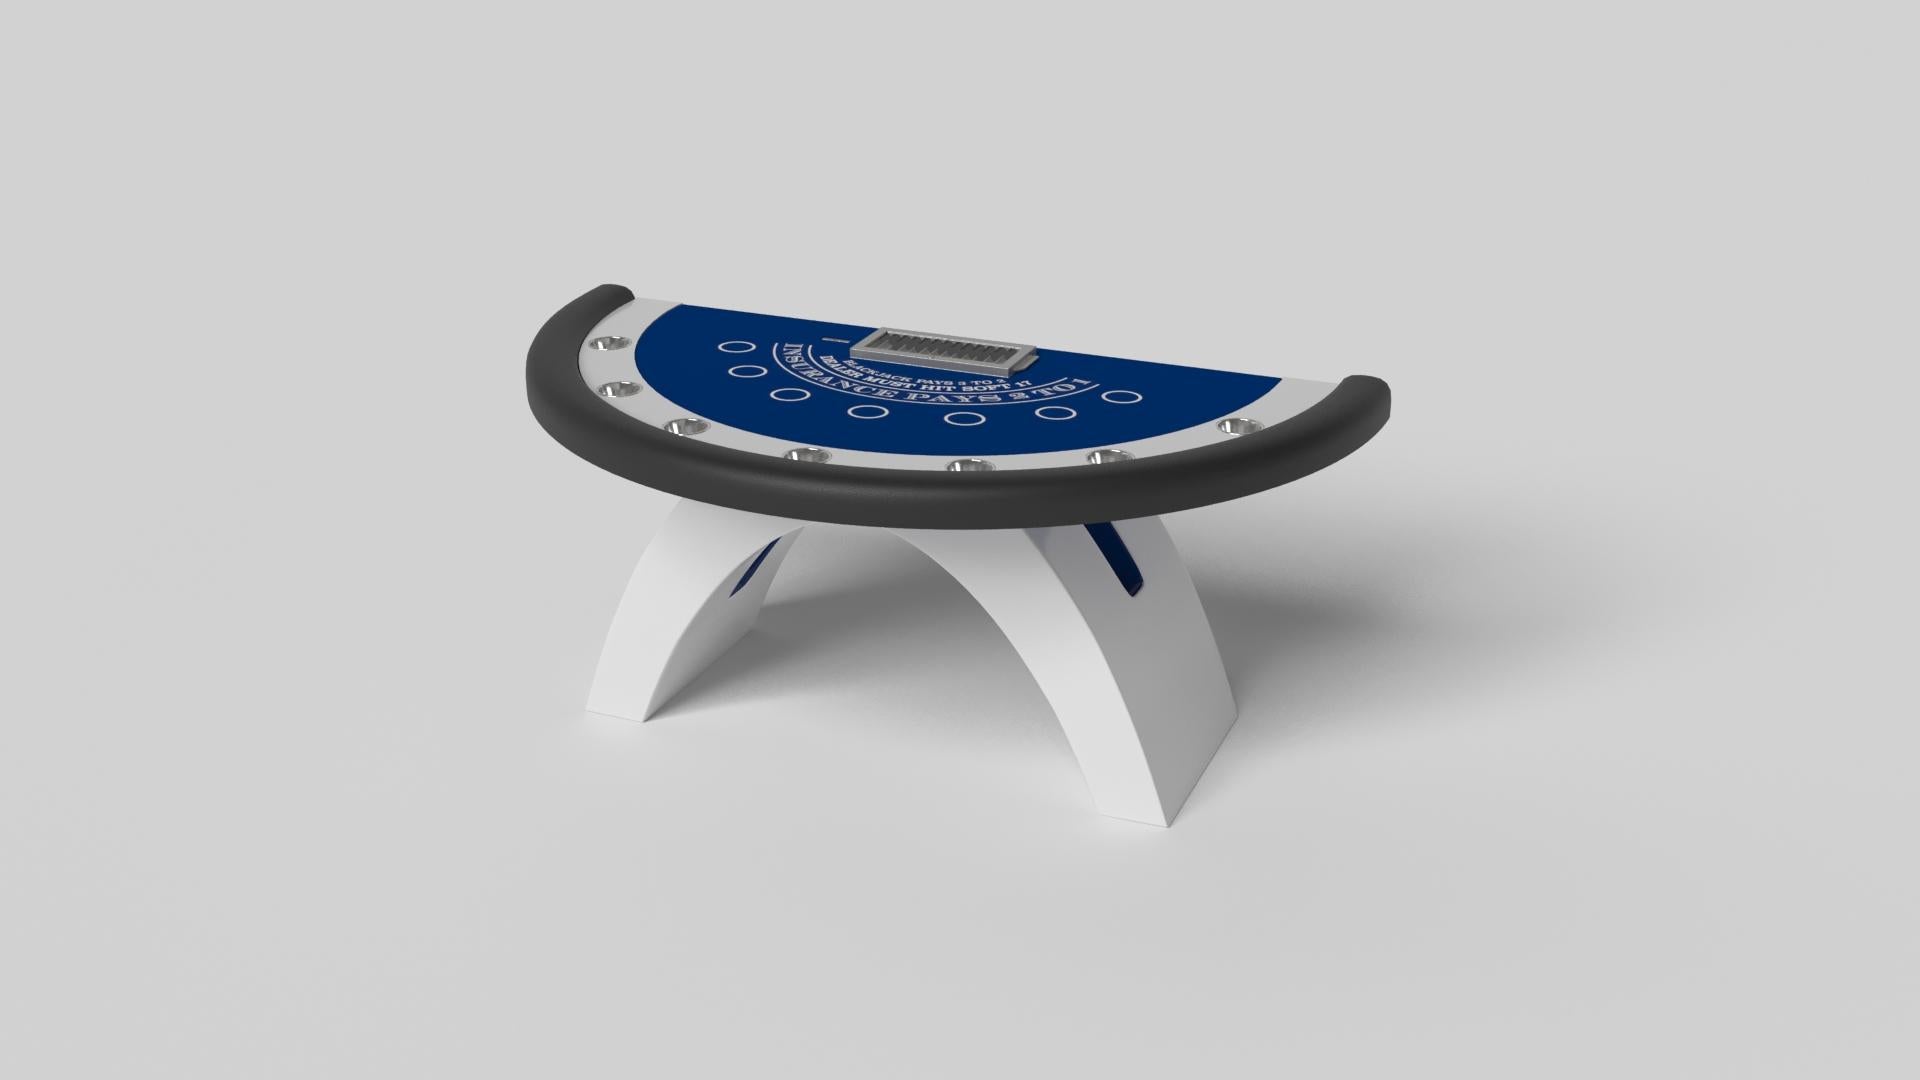 An open, arched base balances beautifully against the hard edges of the semicircular surface top, making the Zenith blackjack table in white a striking juxtaposition of modern, geometric forms. Minimalist in its appeal yet luxurious in design, this